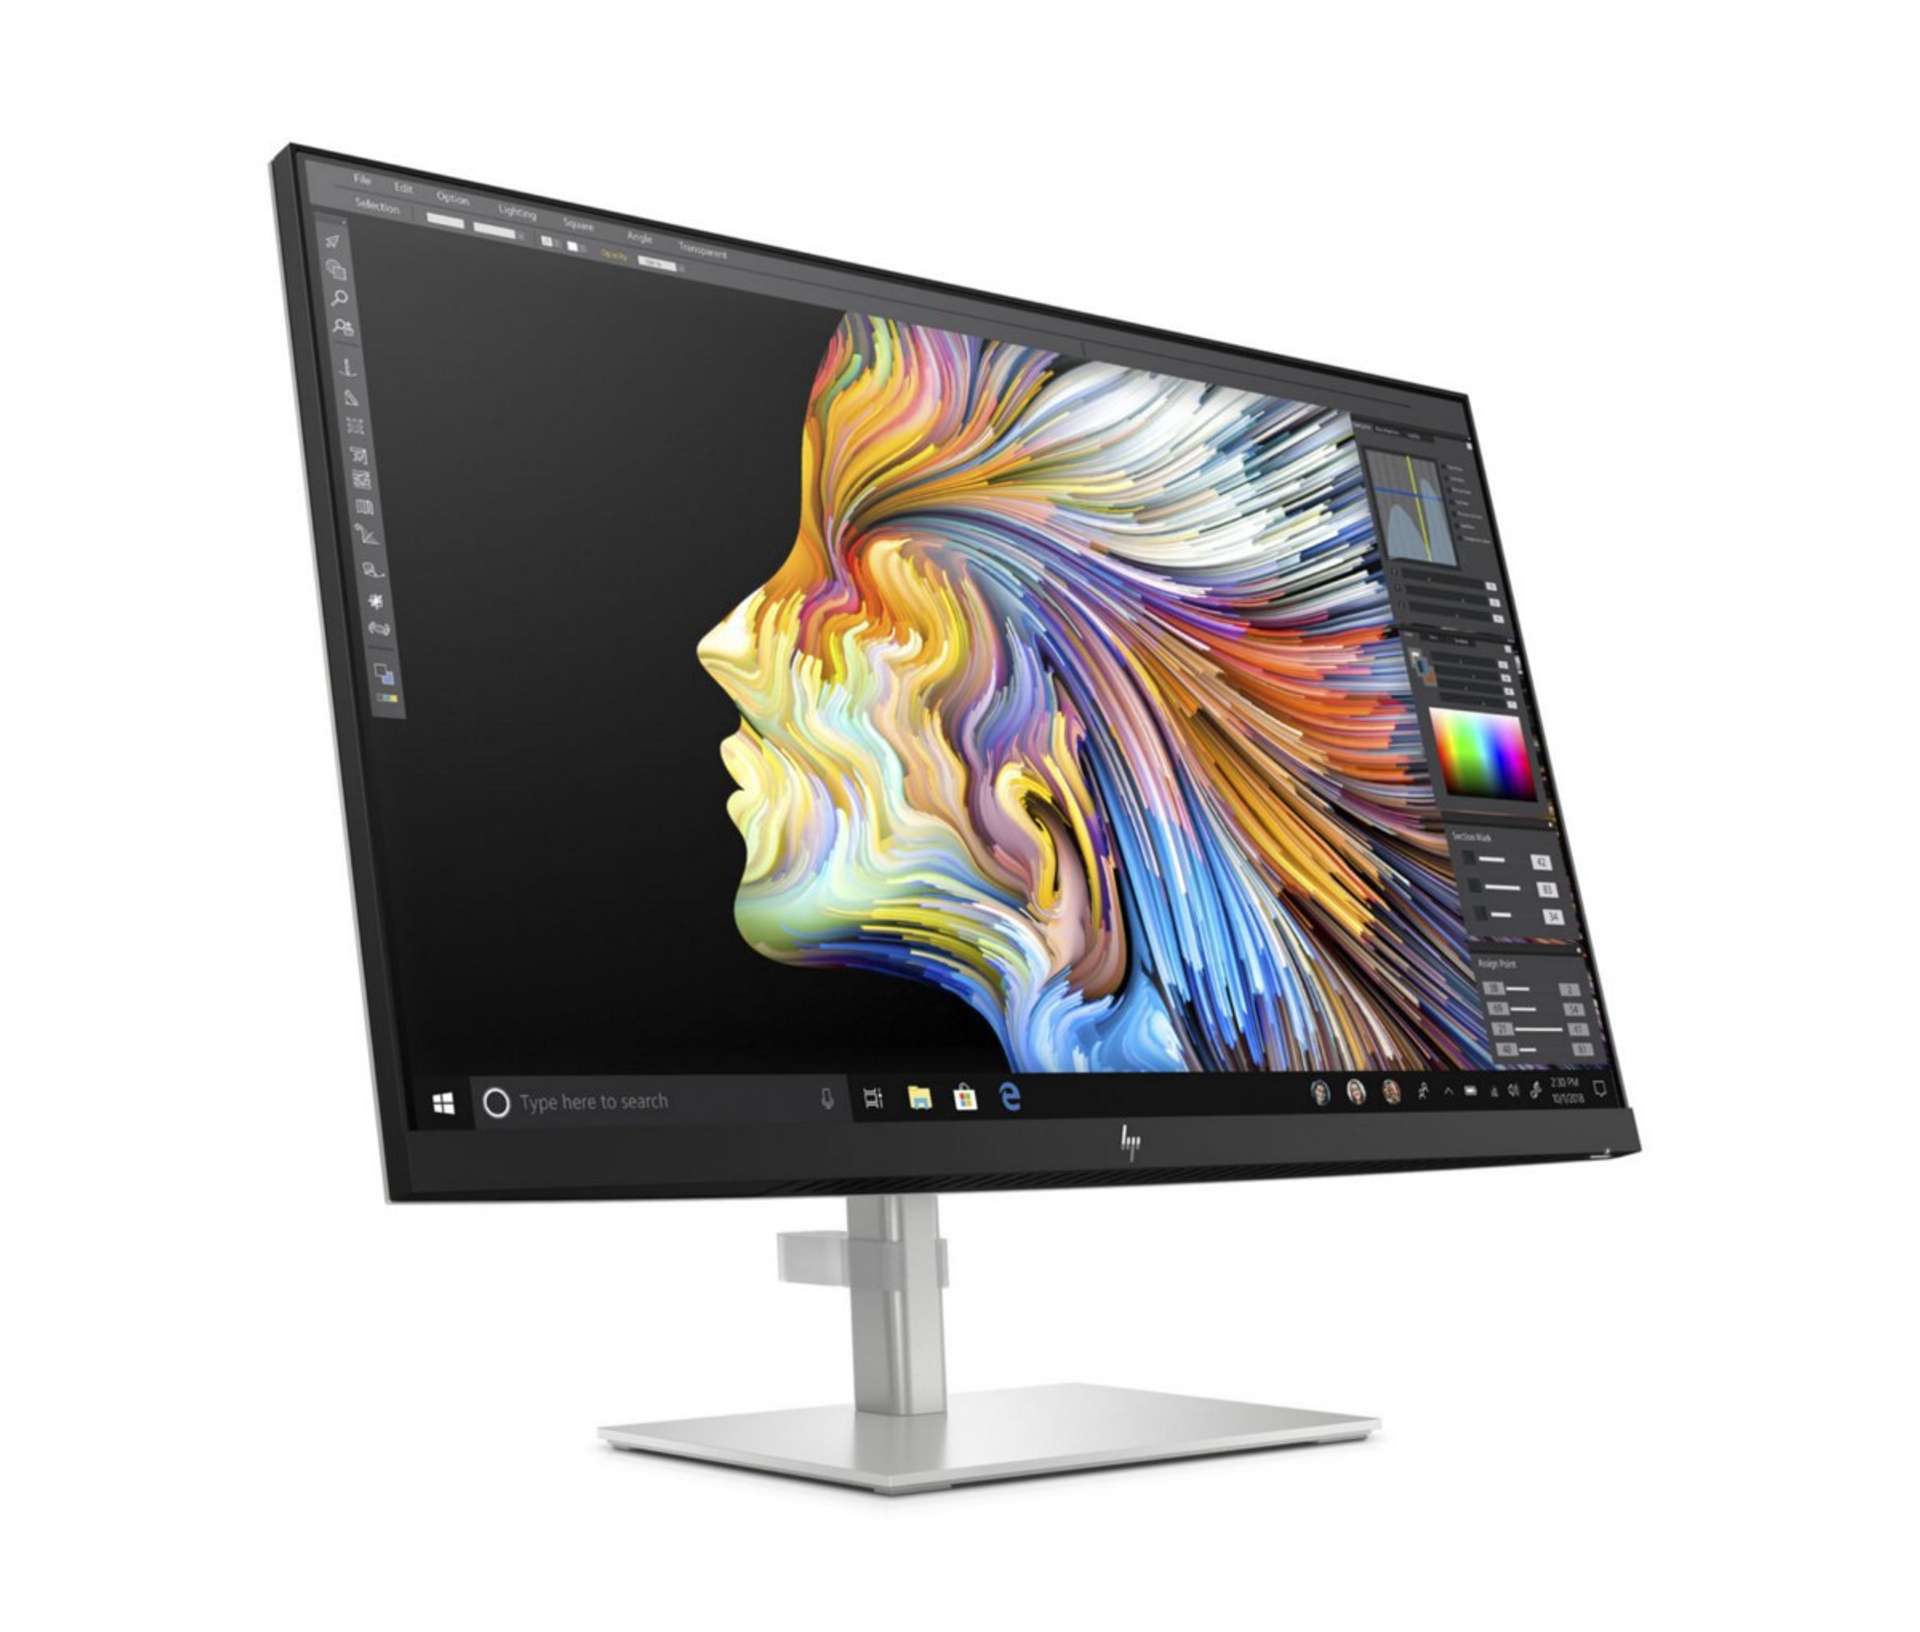 Preview image for post 'HP U28 for work and gaming review'